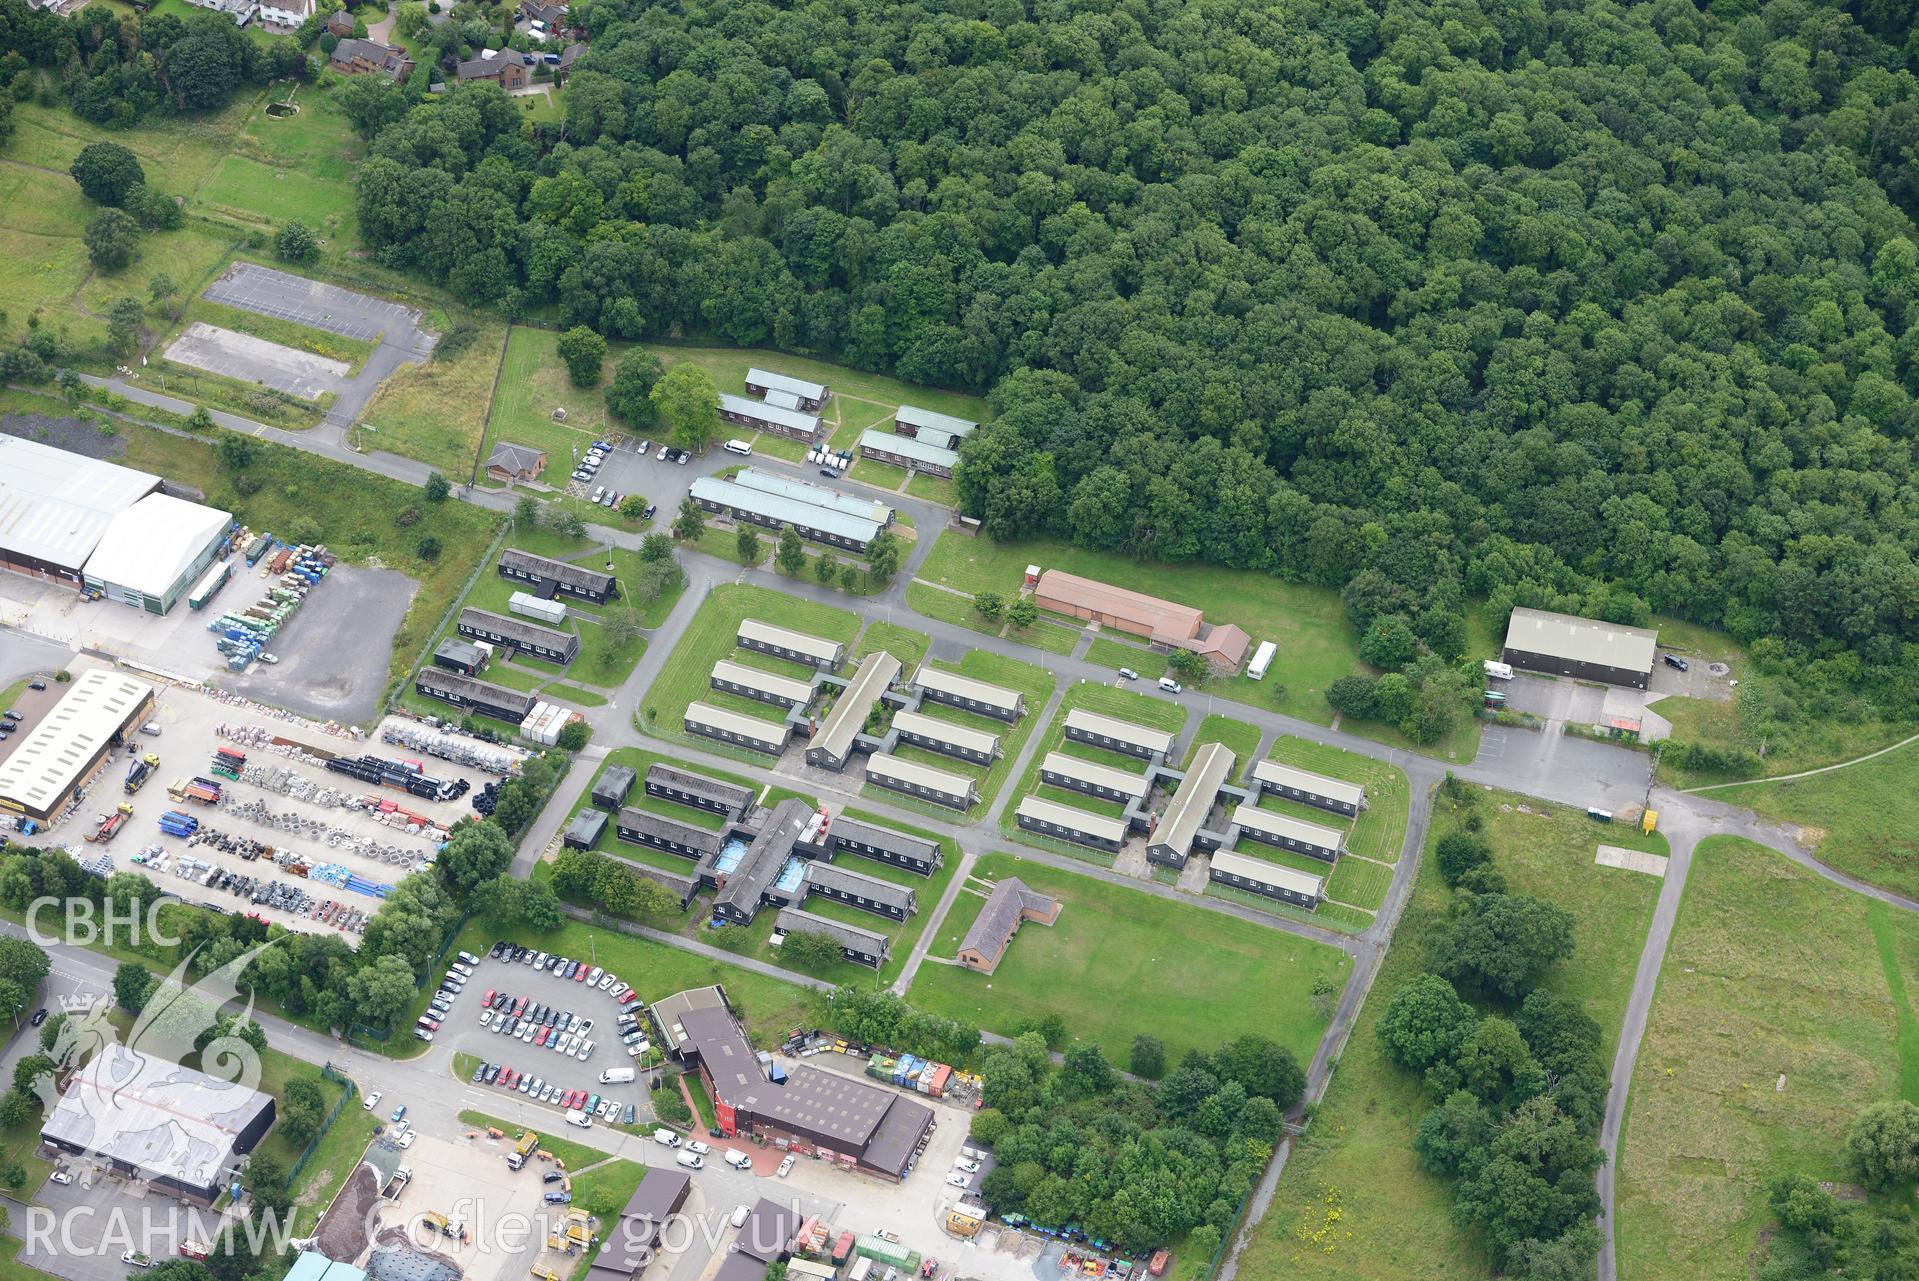 Kinmel Military Camp, Bodelwyddan. Oblique aerial photograph taken during the Royal Commission's programme of archaeological aerial reconnaissance by Toby Driver on 30th July 2015.